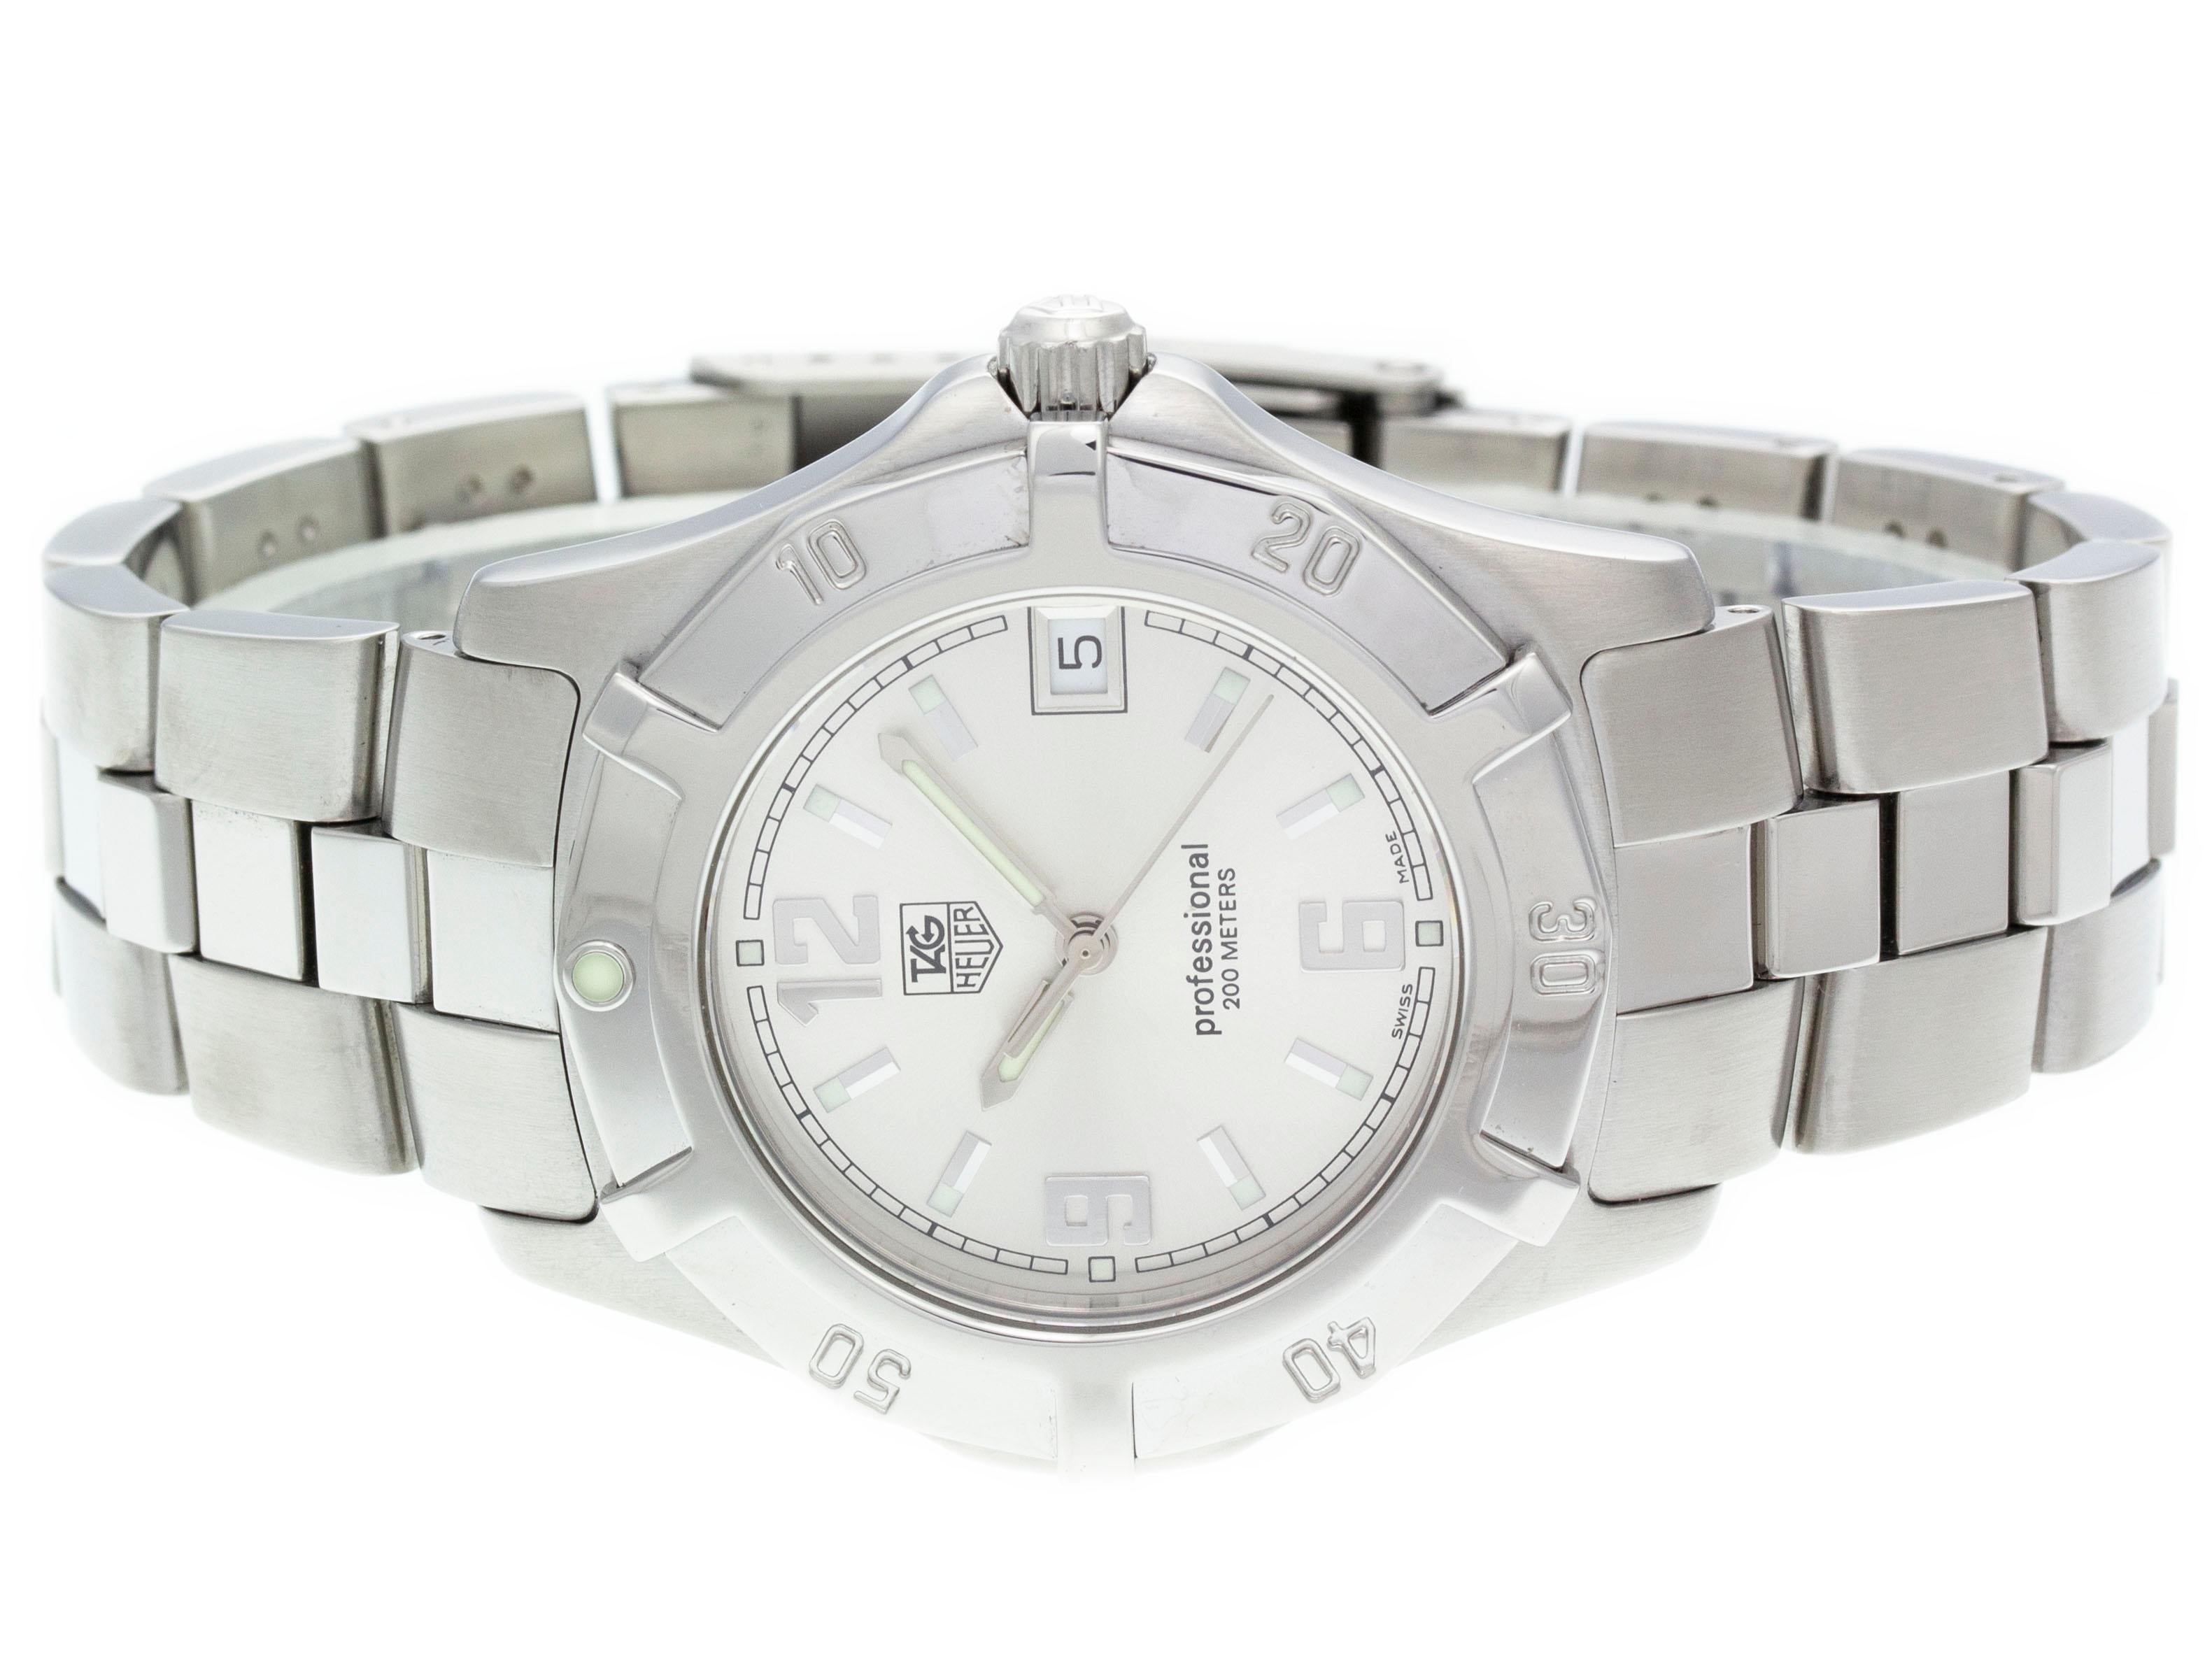 Stainless steel Tag Heuer Professional 2000 Exclusive quartz watch with a 39mm case, silver dial, and bracelet with folding clasp. Features include hours, minutes, seconds and date. Comes with a Gift Box and 2 Year Store Warranty.​

Brand	Tag